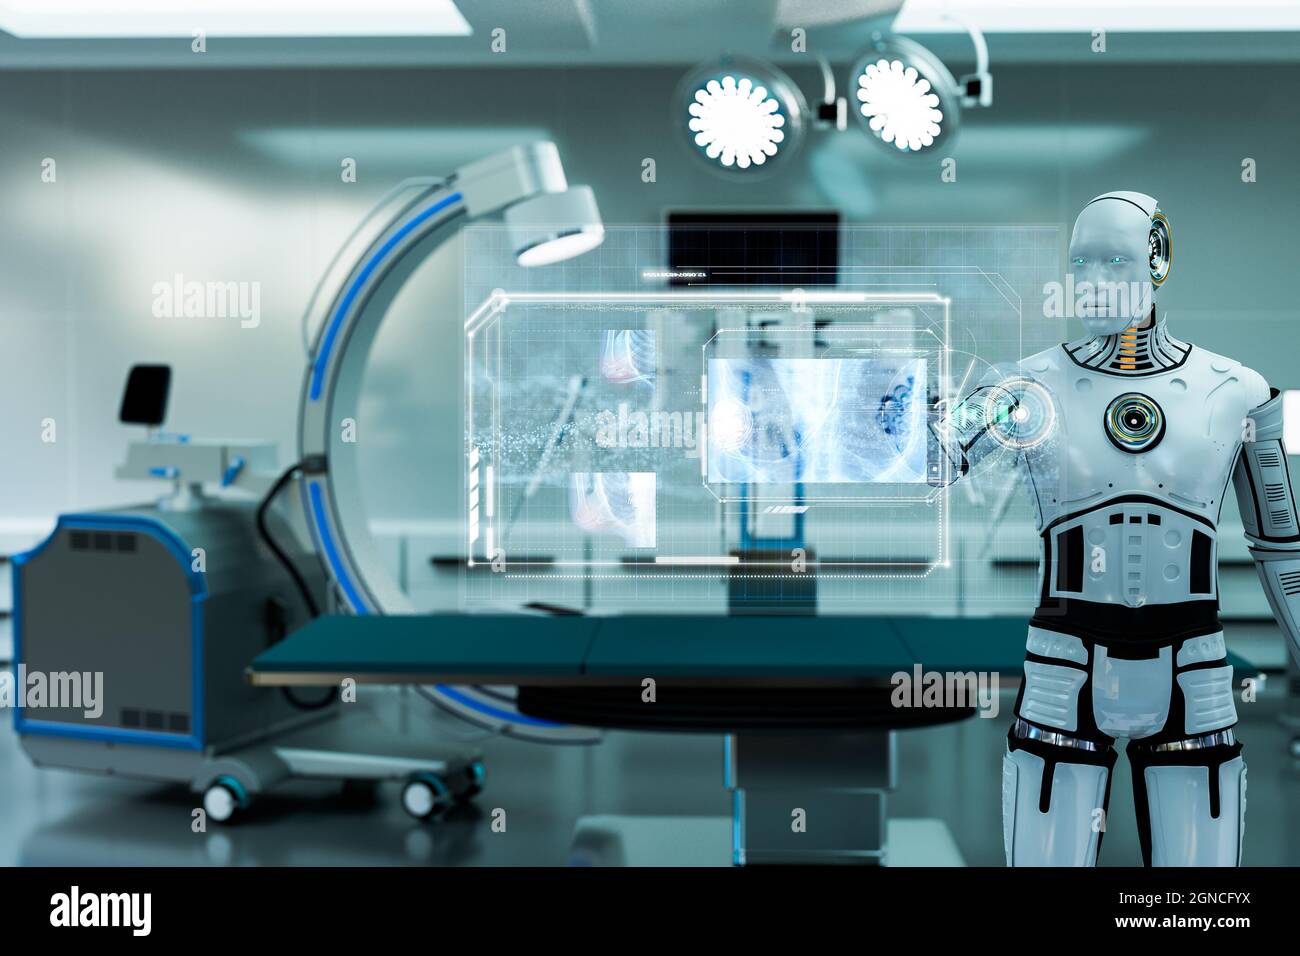 robot working in operation room, robot touching screen and viewing x-ray  image Stock Photo - Alamy